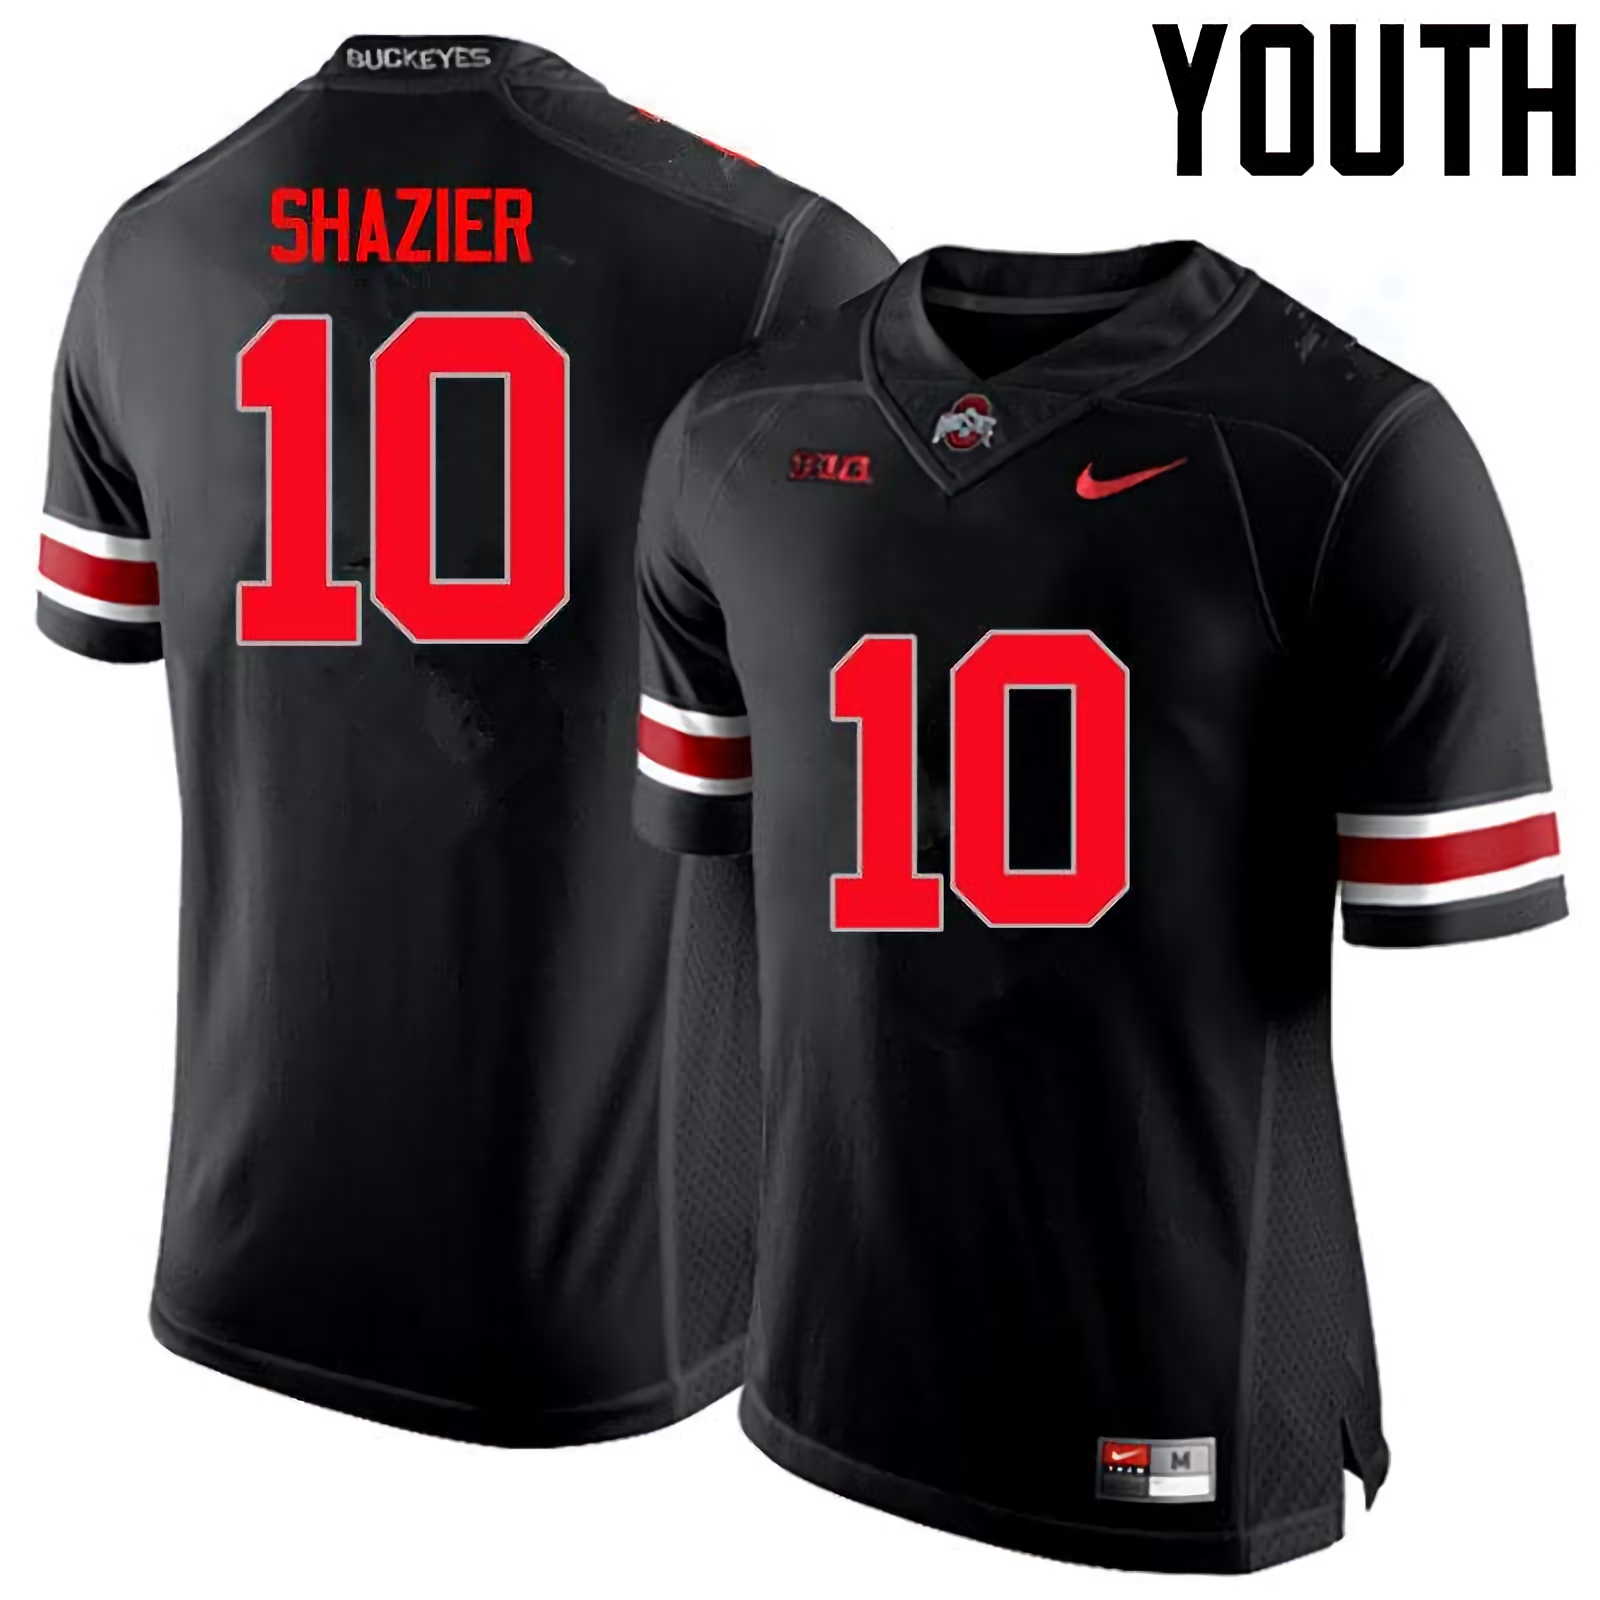 Ryan Shazier Ohio State Buckeyes Youth NCAA #10 Nike Black Limited College Stitched Football Jersey VGO8856OD